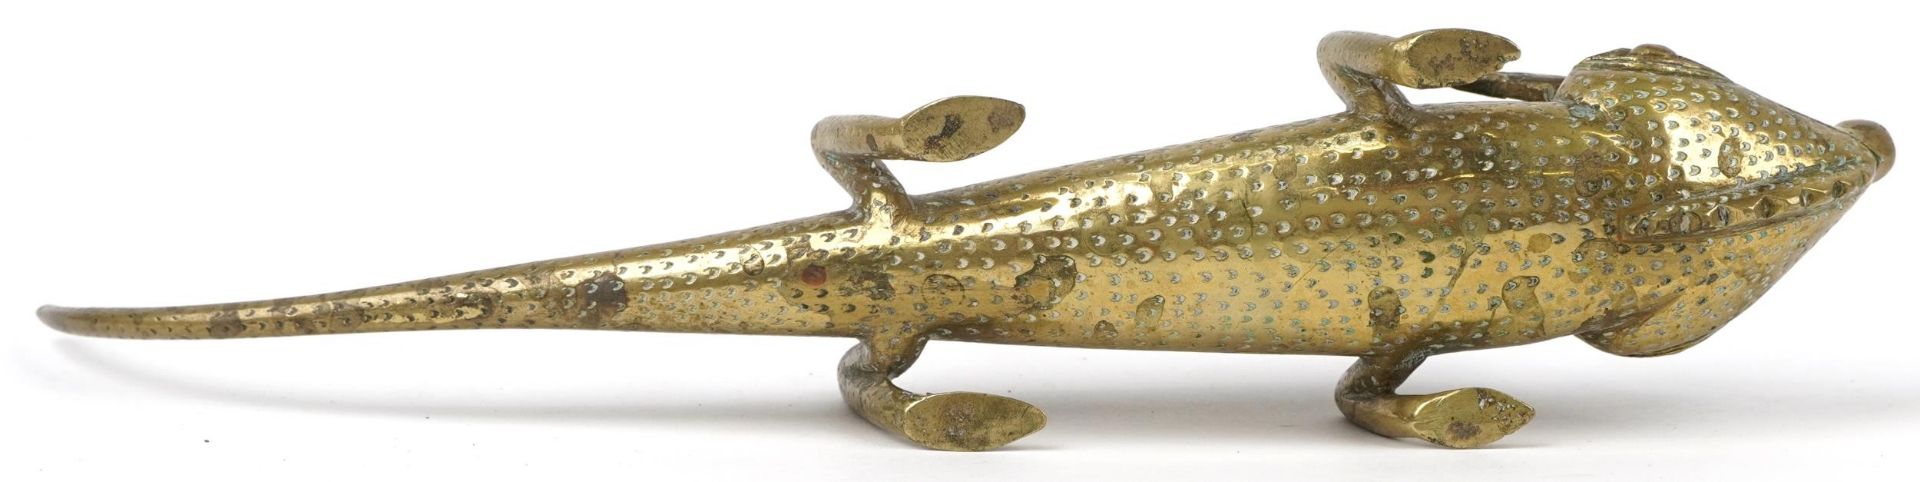 Antique Asian brass chameleon, possibly Indian, 28cm in length - Image 3 of 3